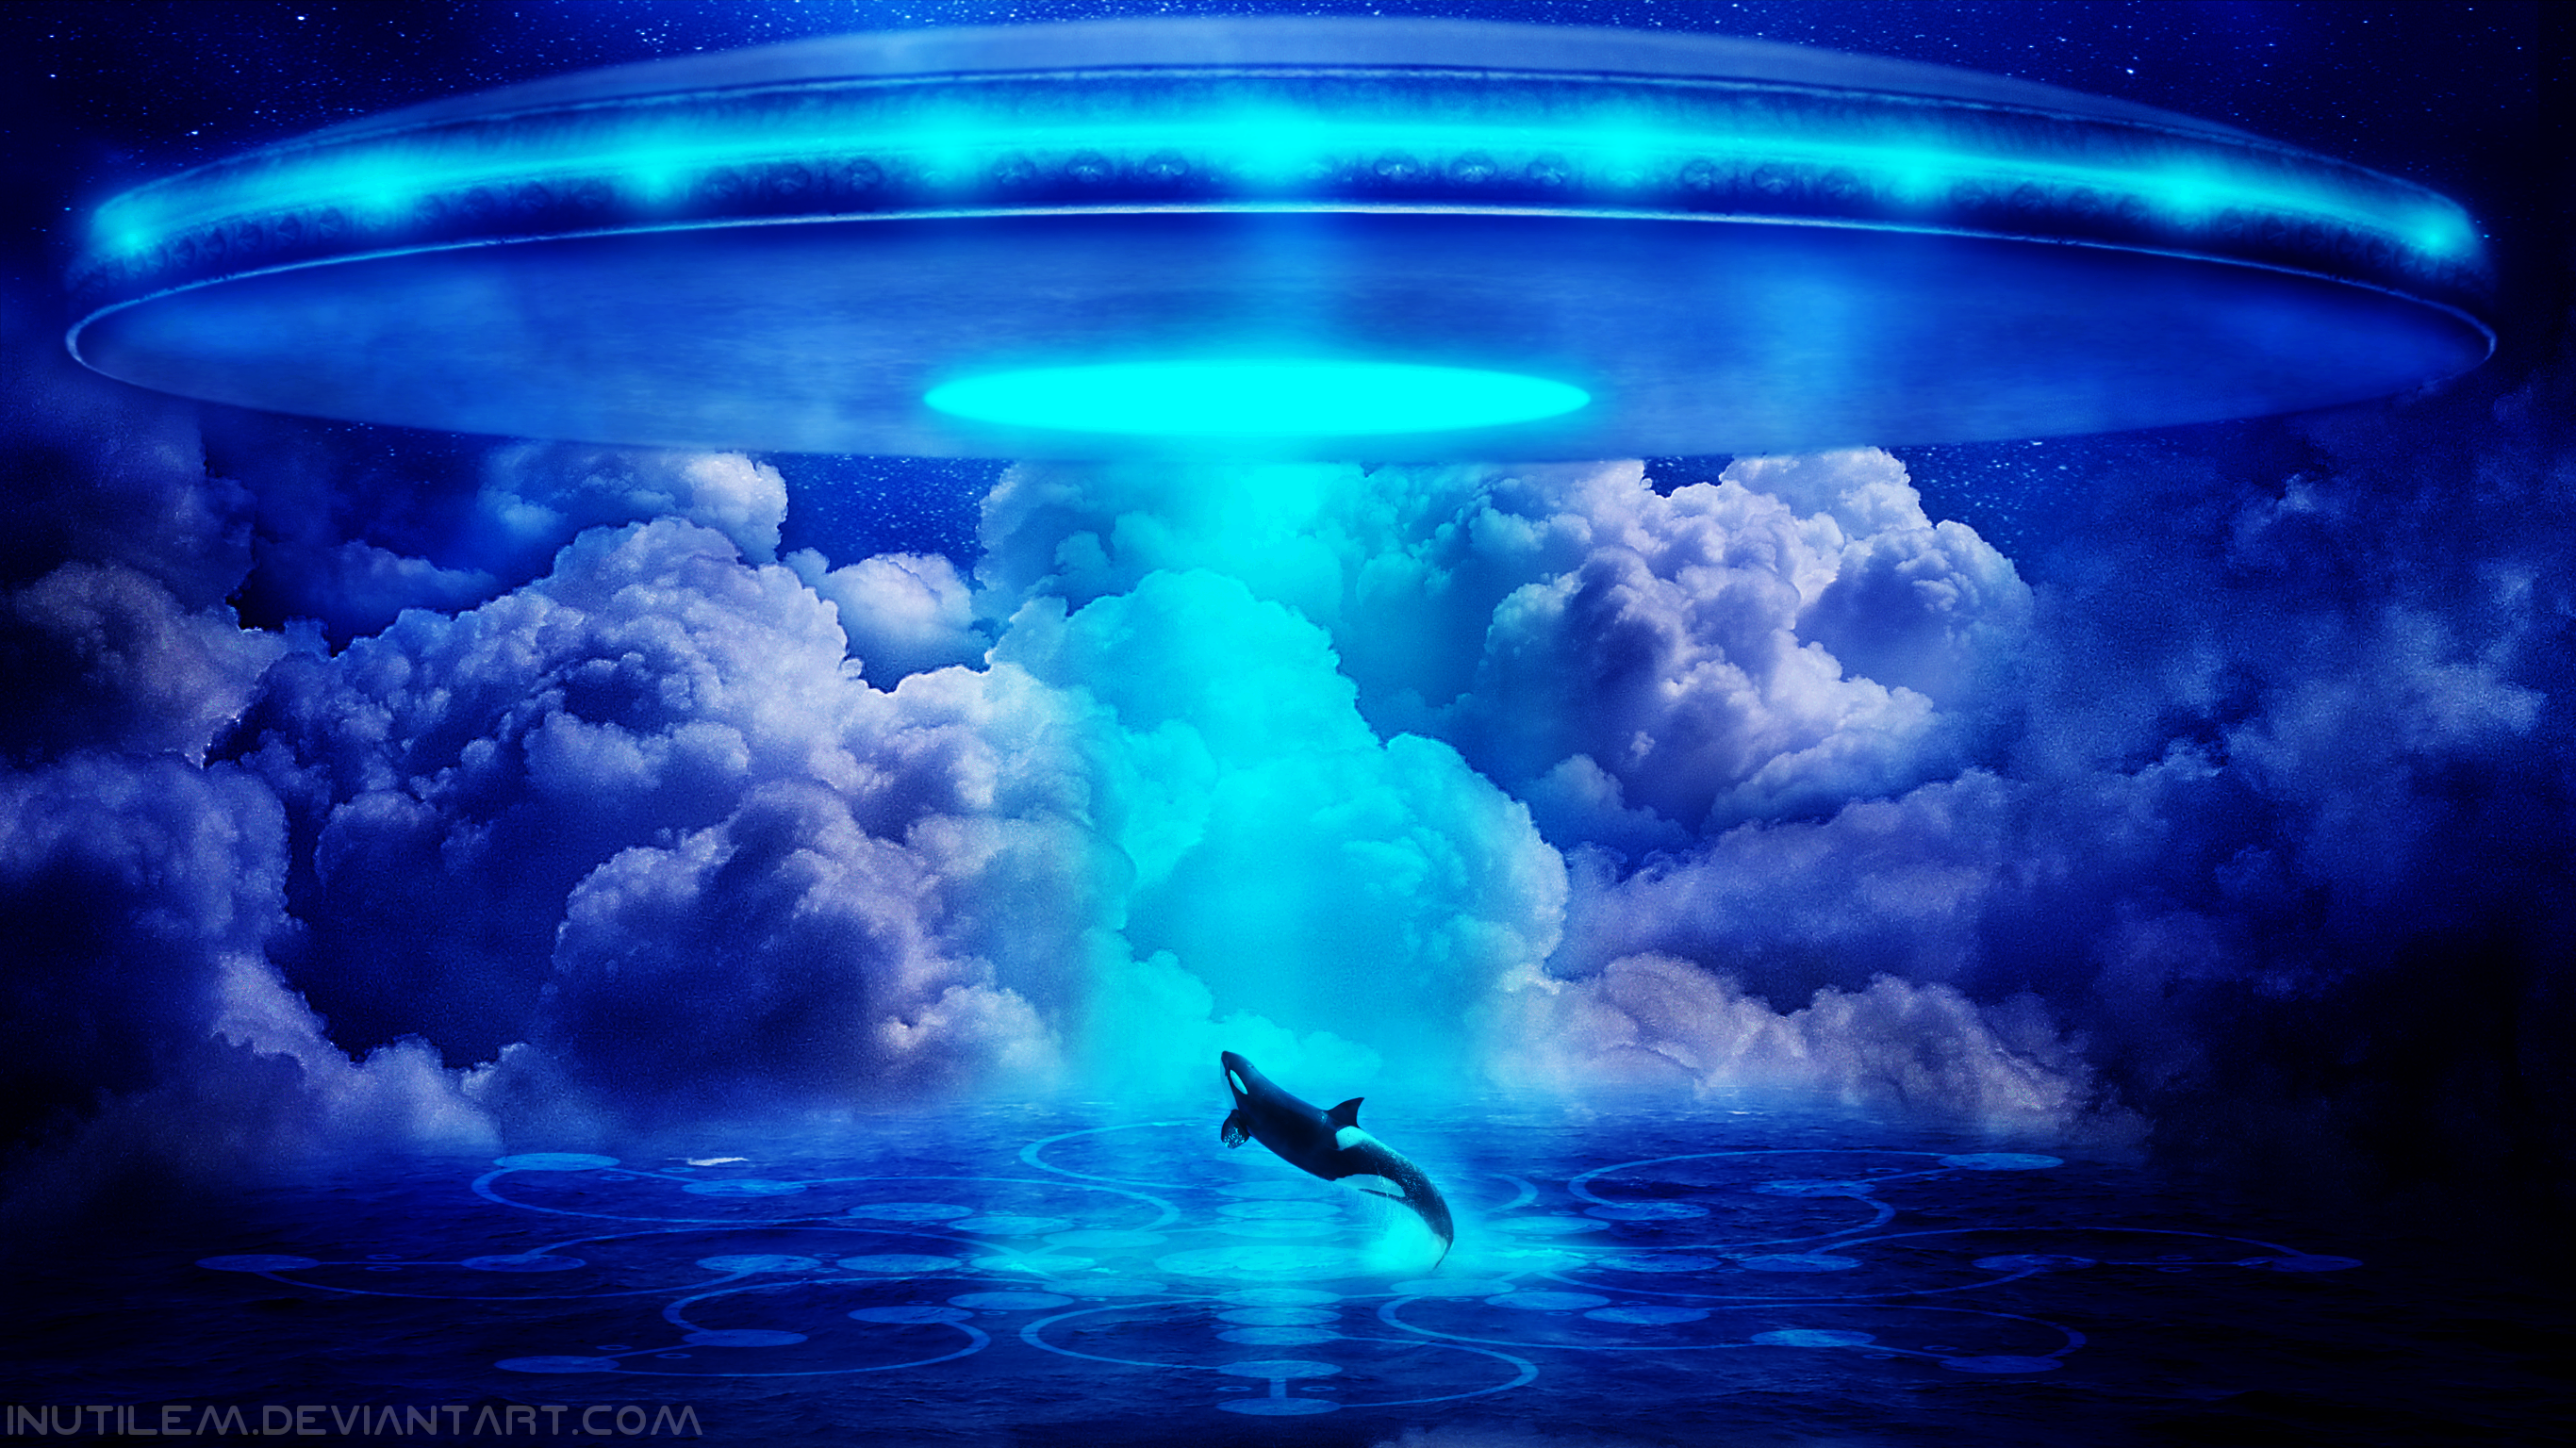 Oceanic Abduction Full HD Wallpaper And Background